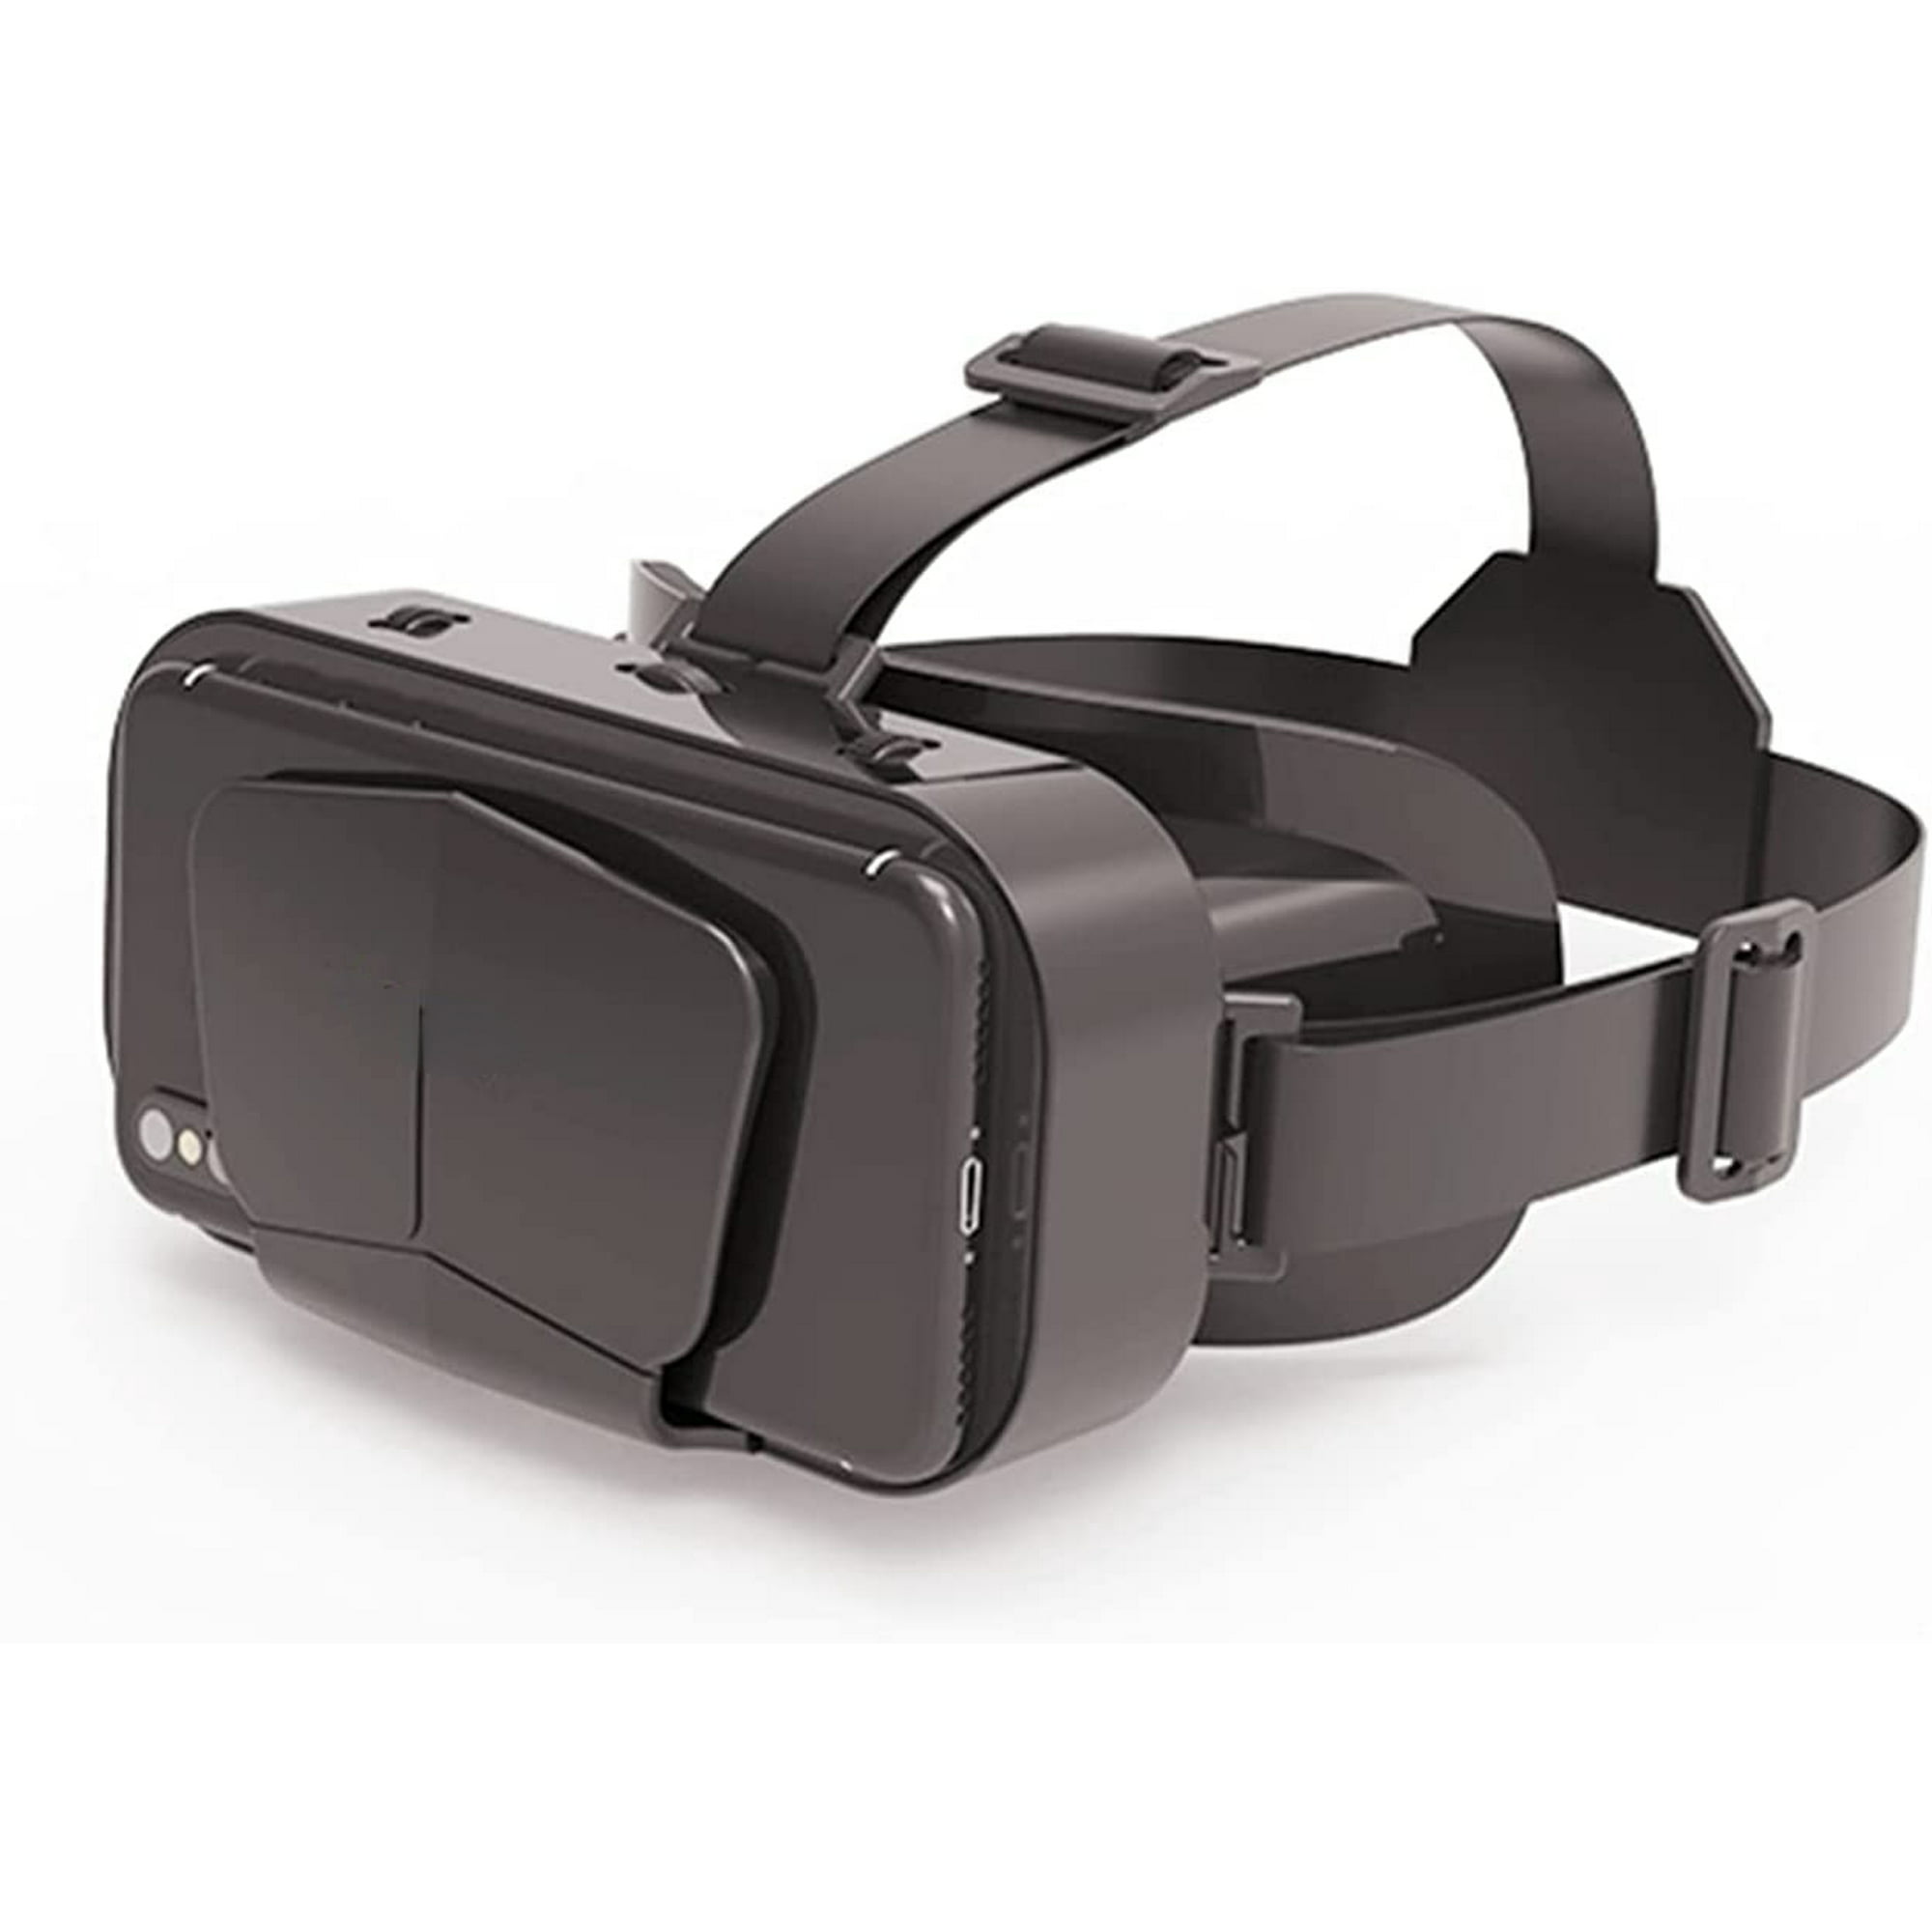 Aochakimg VR Headset, 3D Virtual Reality Glasses with Blu-ray Eye Protected Light Small, 3D Glasses for Watch Movies, Video & Play Game, Support 4.7-7.0” Smartphone. (Without Controller) - Walmart.com